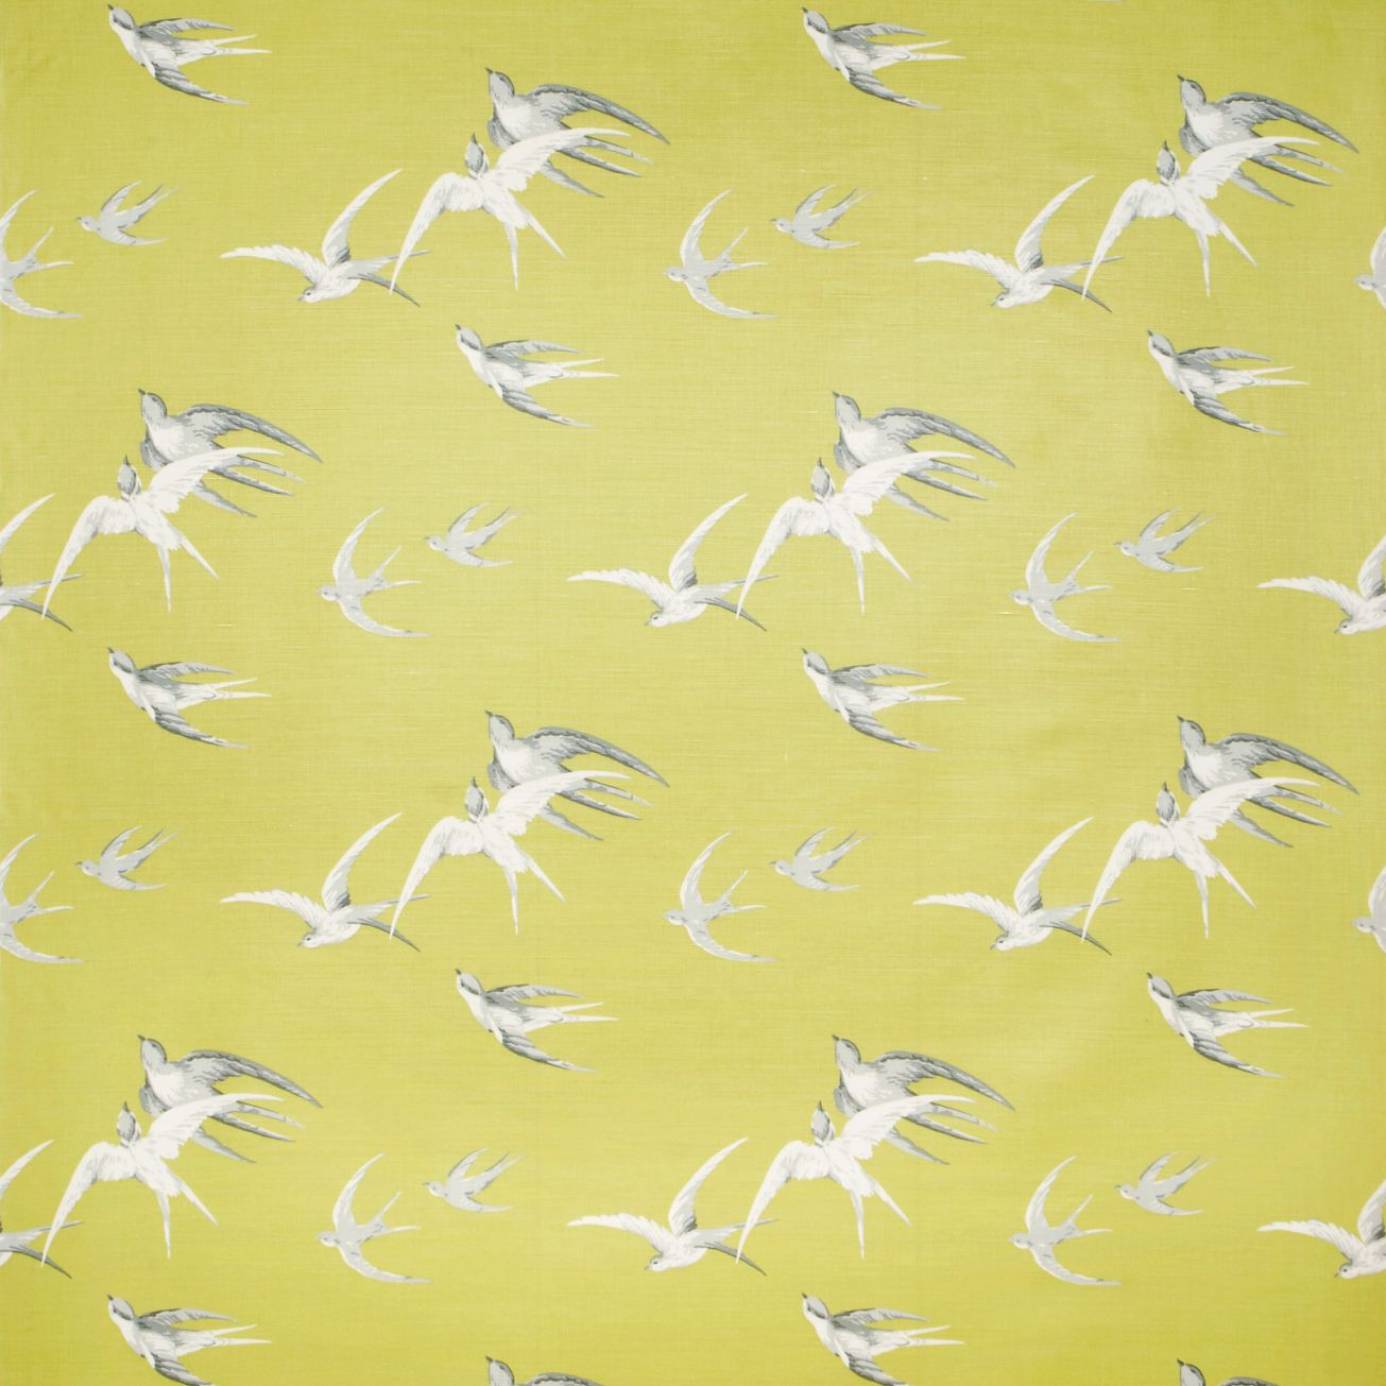 Home Wallpapers Sanderson Vintage Wallpapers Swallows Wallpaper   Lime